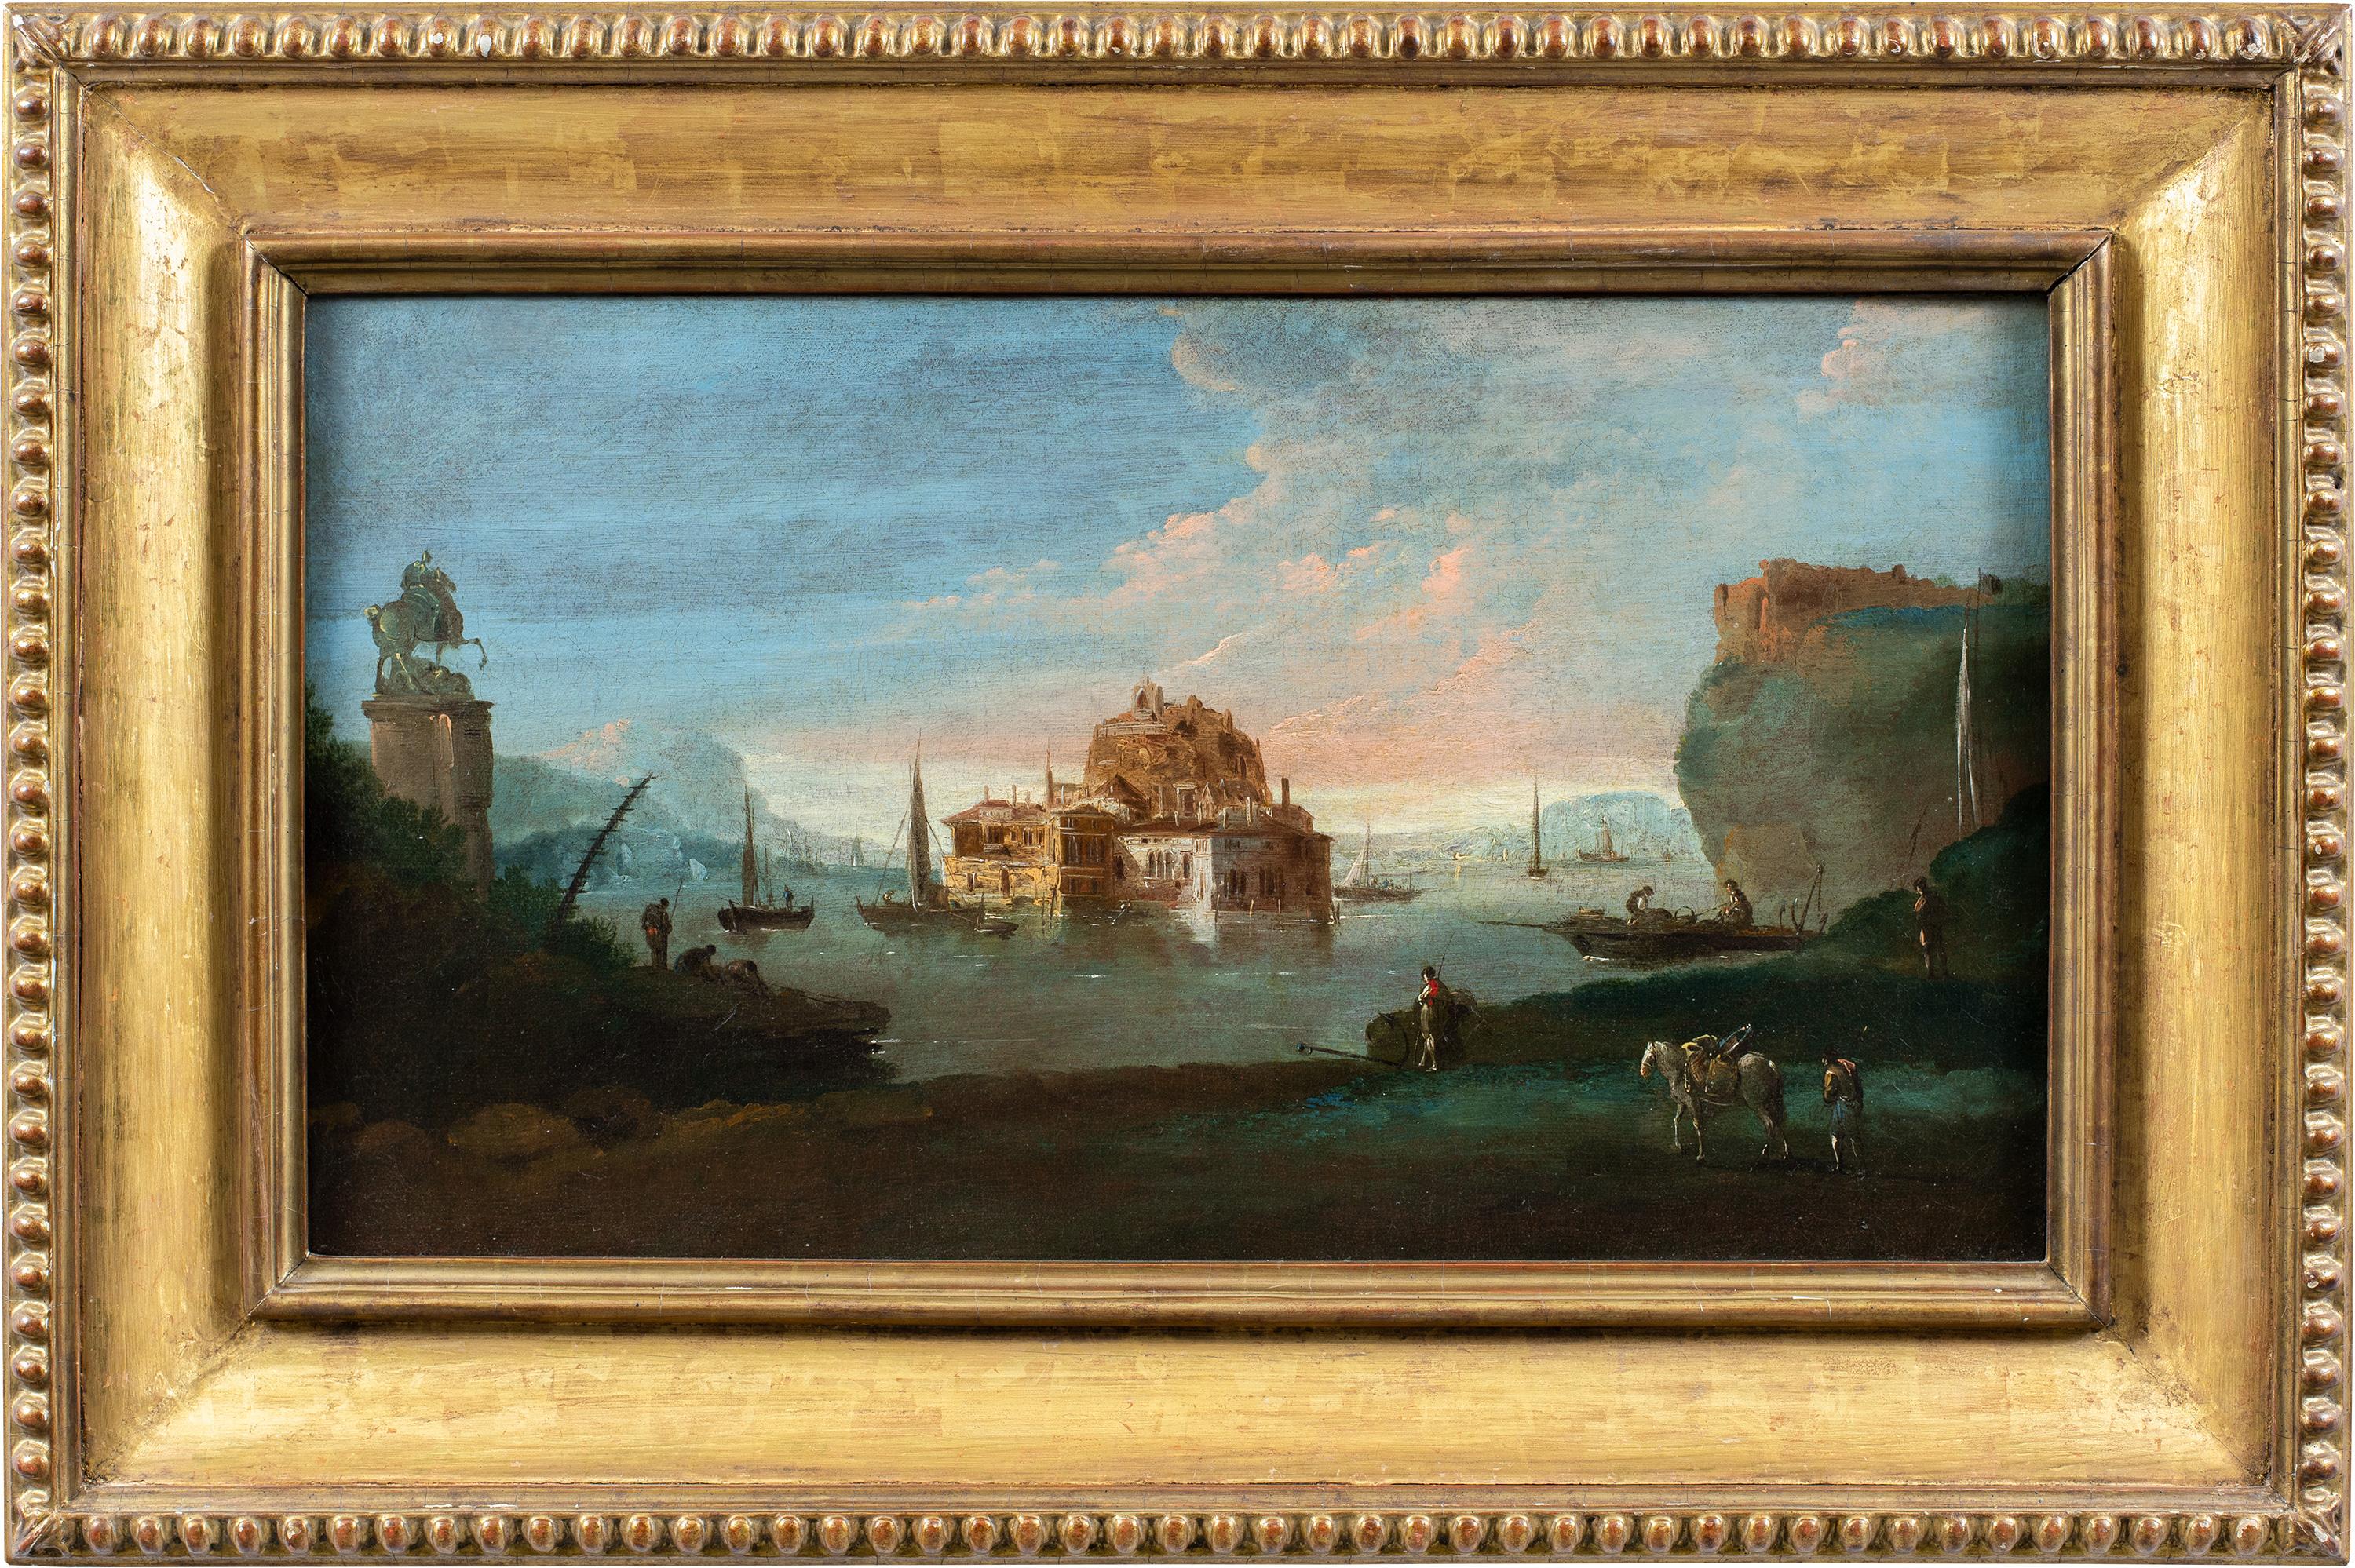 Giuseppe Bernardino Bison (Palmanova 1762 - Milan 1844) - Fantastic landscape with citadel and equestrian statue.

35 x 62 cm without frame, 53 x 80 cm with frame.

Antique oil painting on canvas, in a gilded wooden frame.

- The painting is